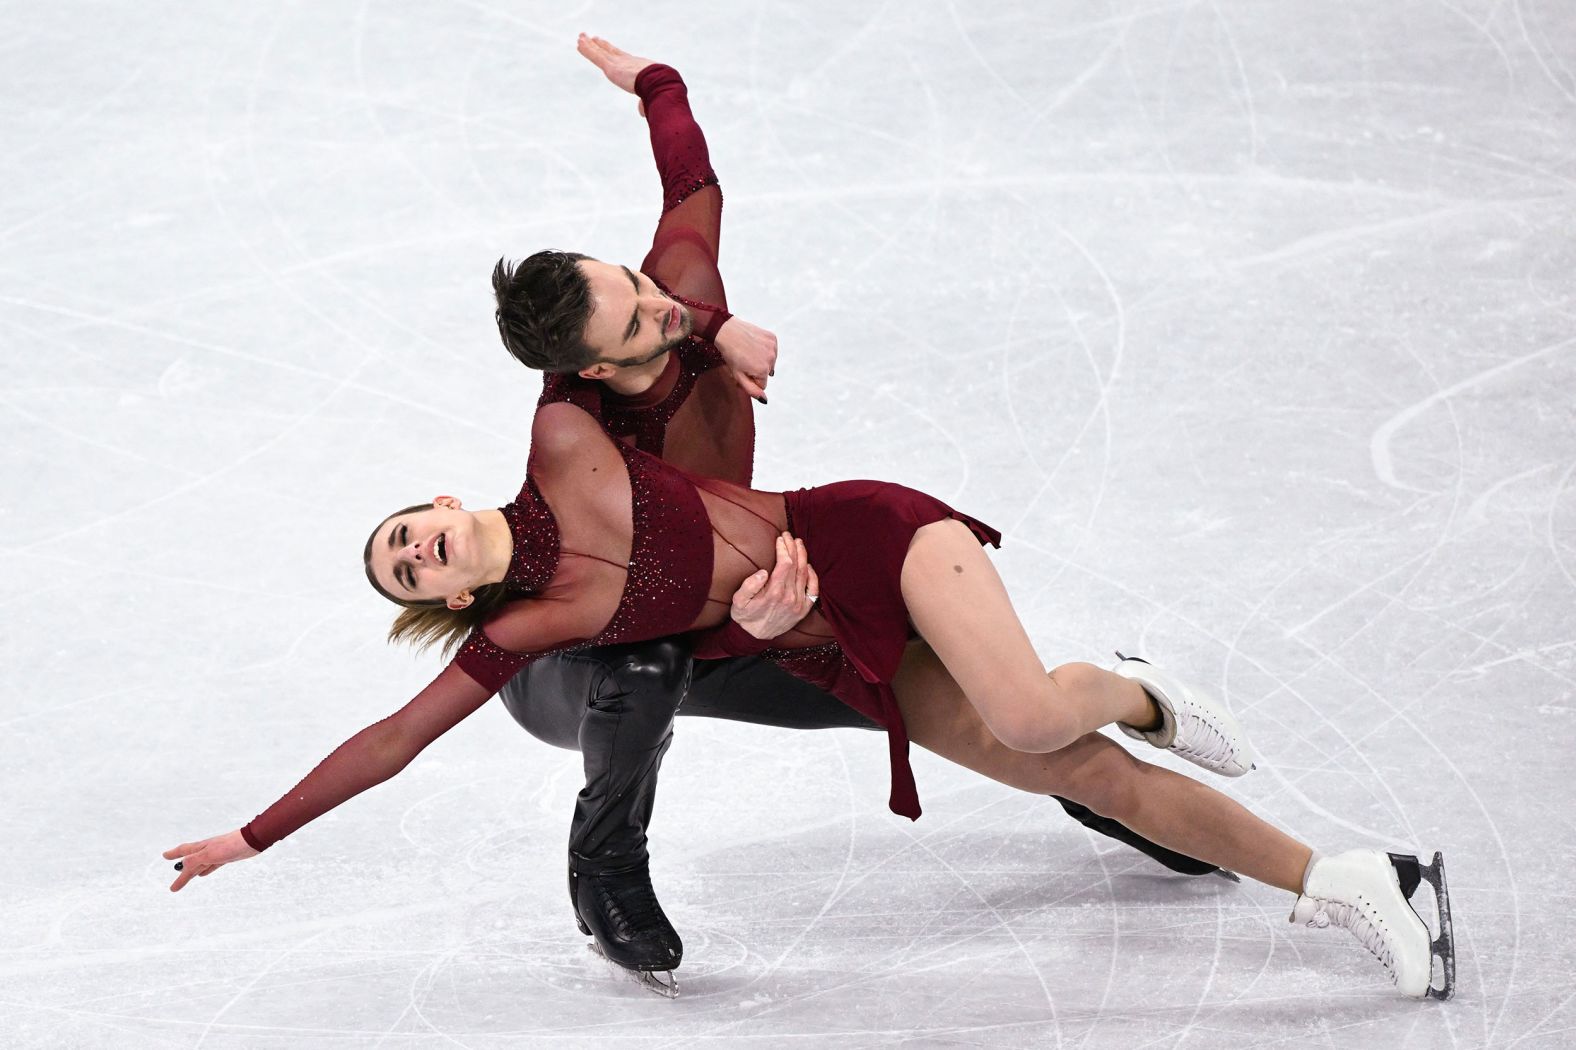 French ice dancers Guillaume Cizeron and Gabriella Papadakis compete on February 12. The pair<a href="index.php?page=&url=https%3A%2F%2Fwww.cnn.com%2Fworld%2Flive-news%2Fbeijing-winter-olympics-02-12-22-spt%2Fh_72149bc80da25d3171efdebafa9d5e64" target="_blank"> set a new world record</a> in the rhythm dance and would go on to win the gold medal.